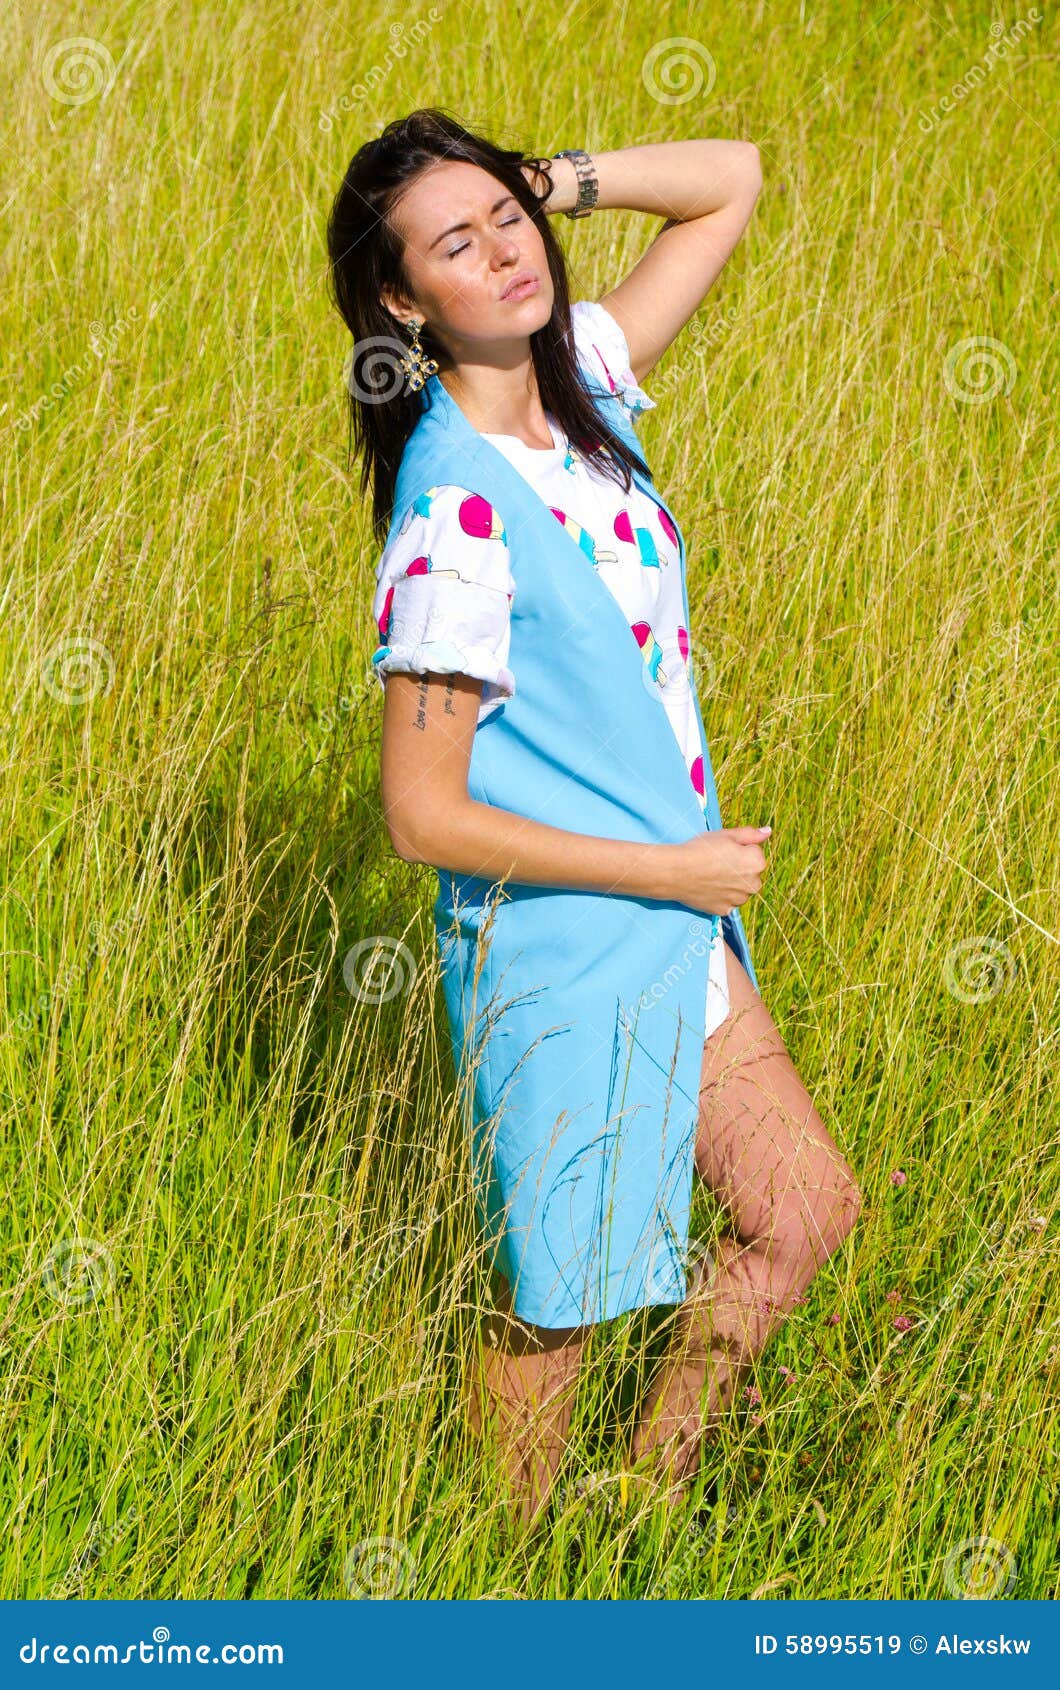 The Girl Goes on the Green Field Stock Image - Image of freedom, field ...